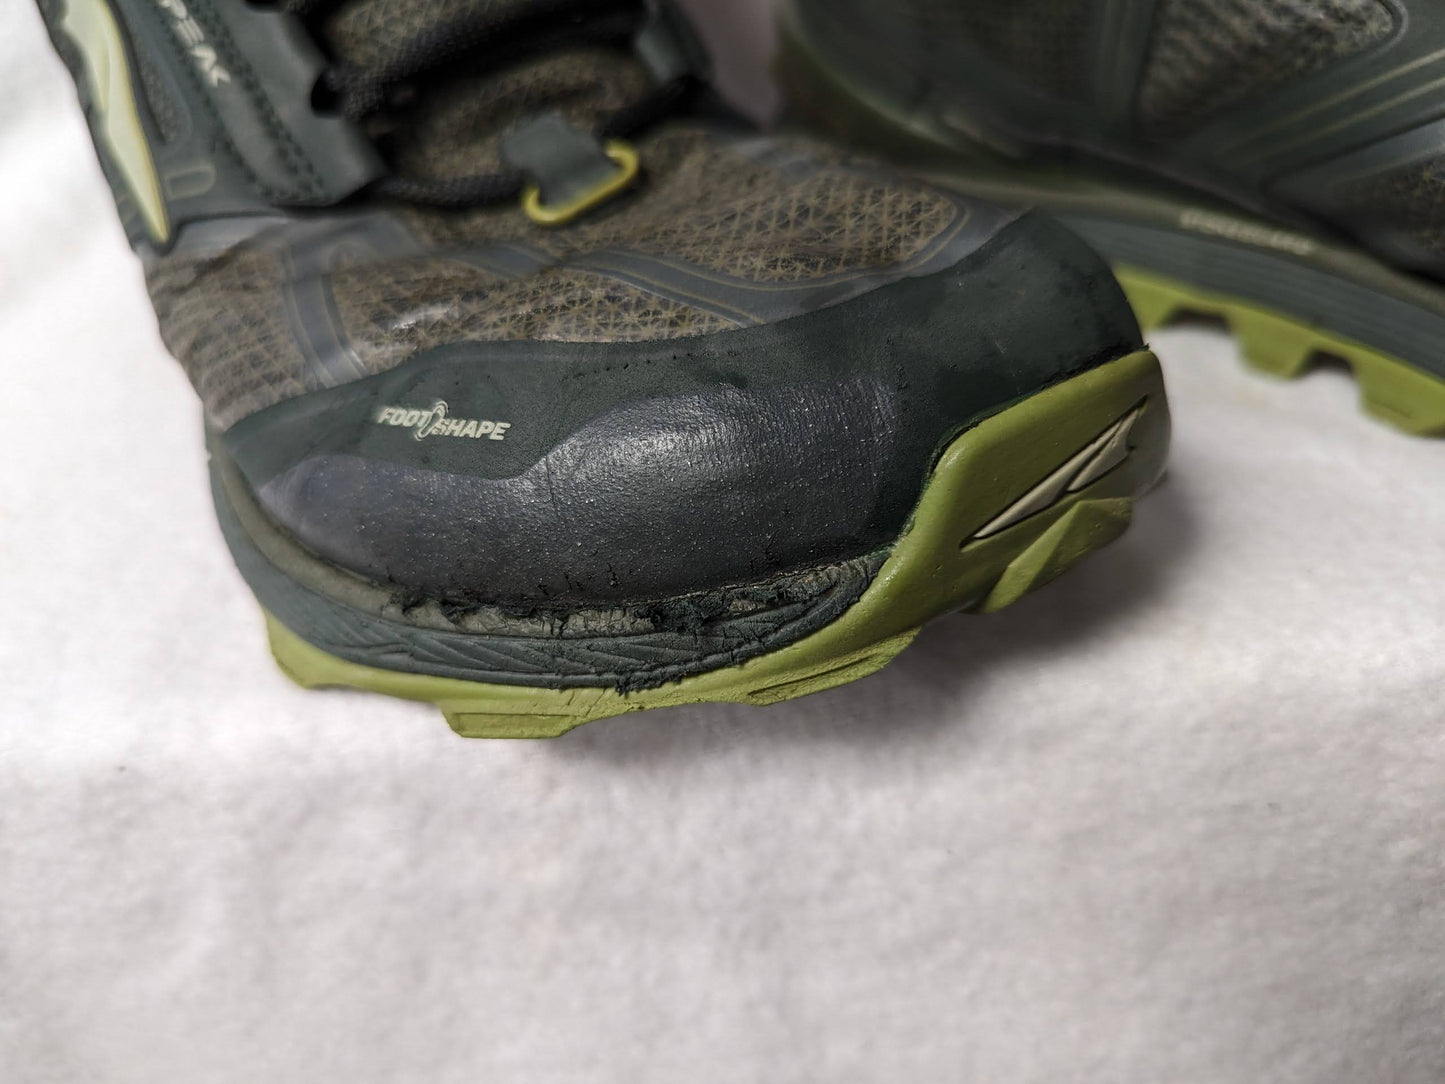 Lone Peak Hiking Trail Boots Shoes Size 11.5 Color Green Condition Used